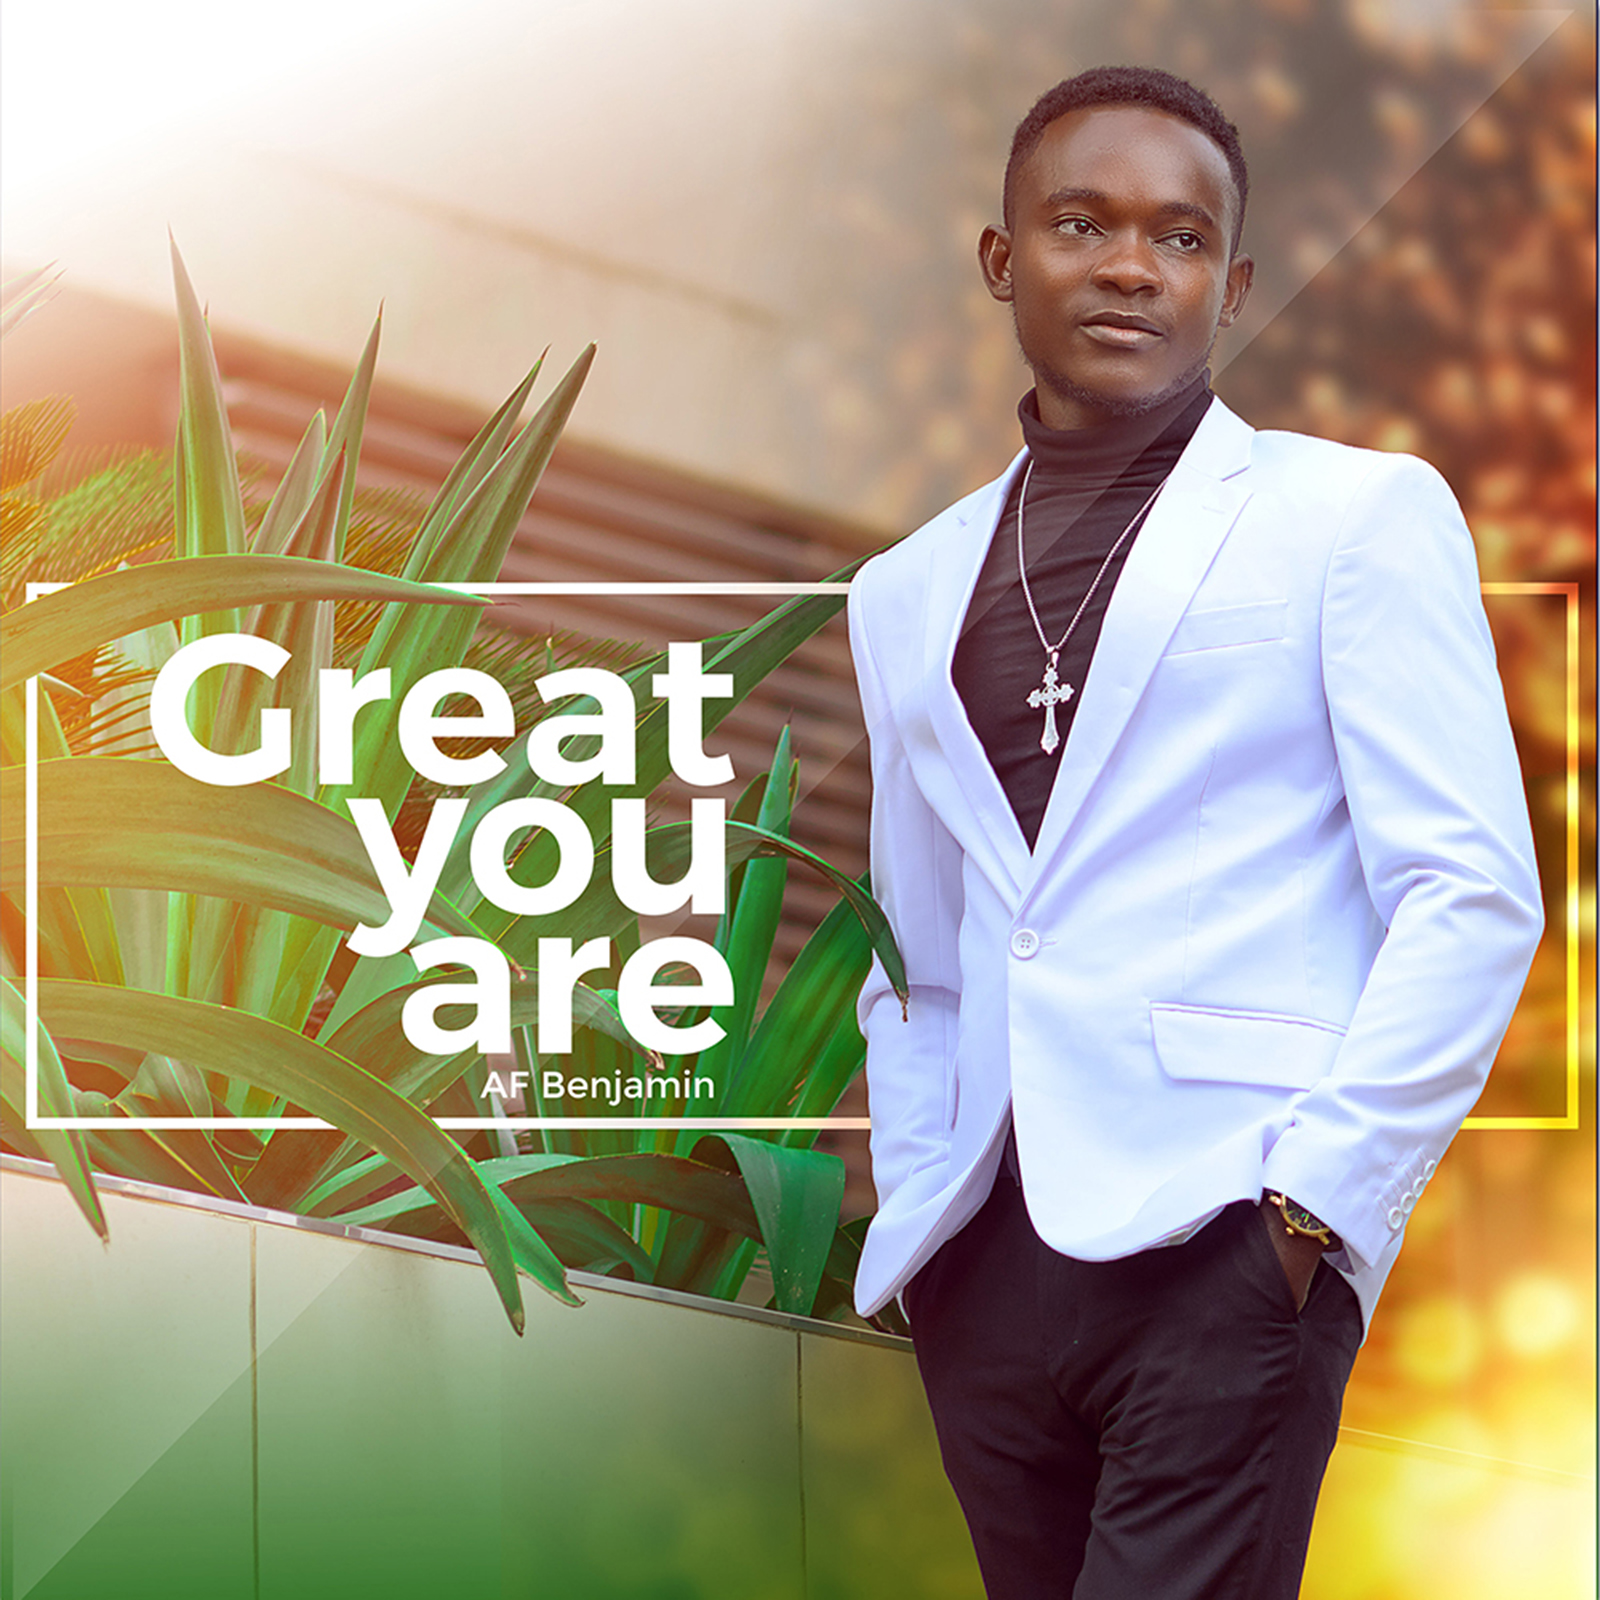 Great You Are by AF Benjamin